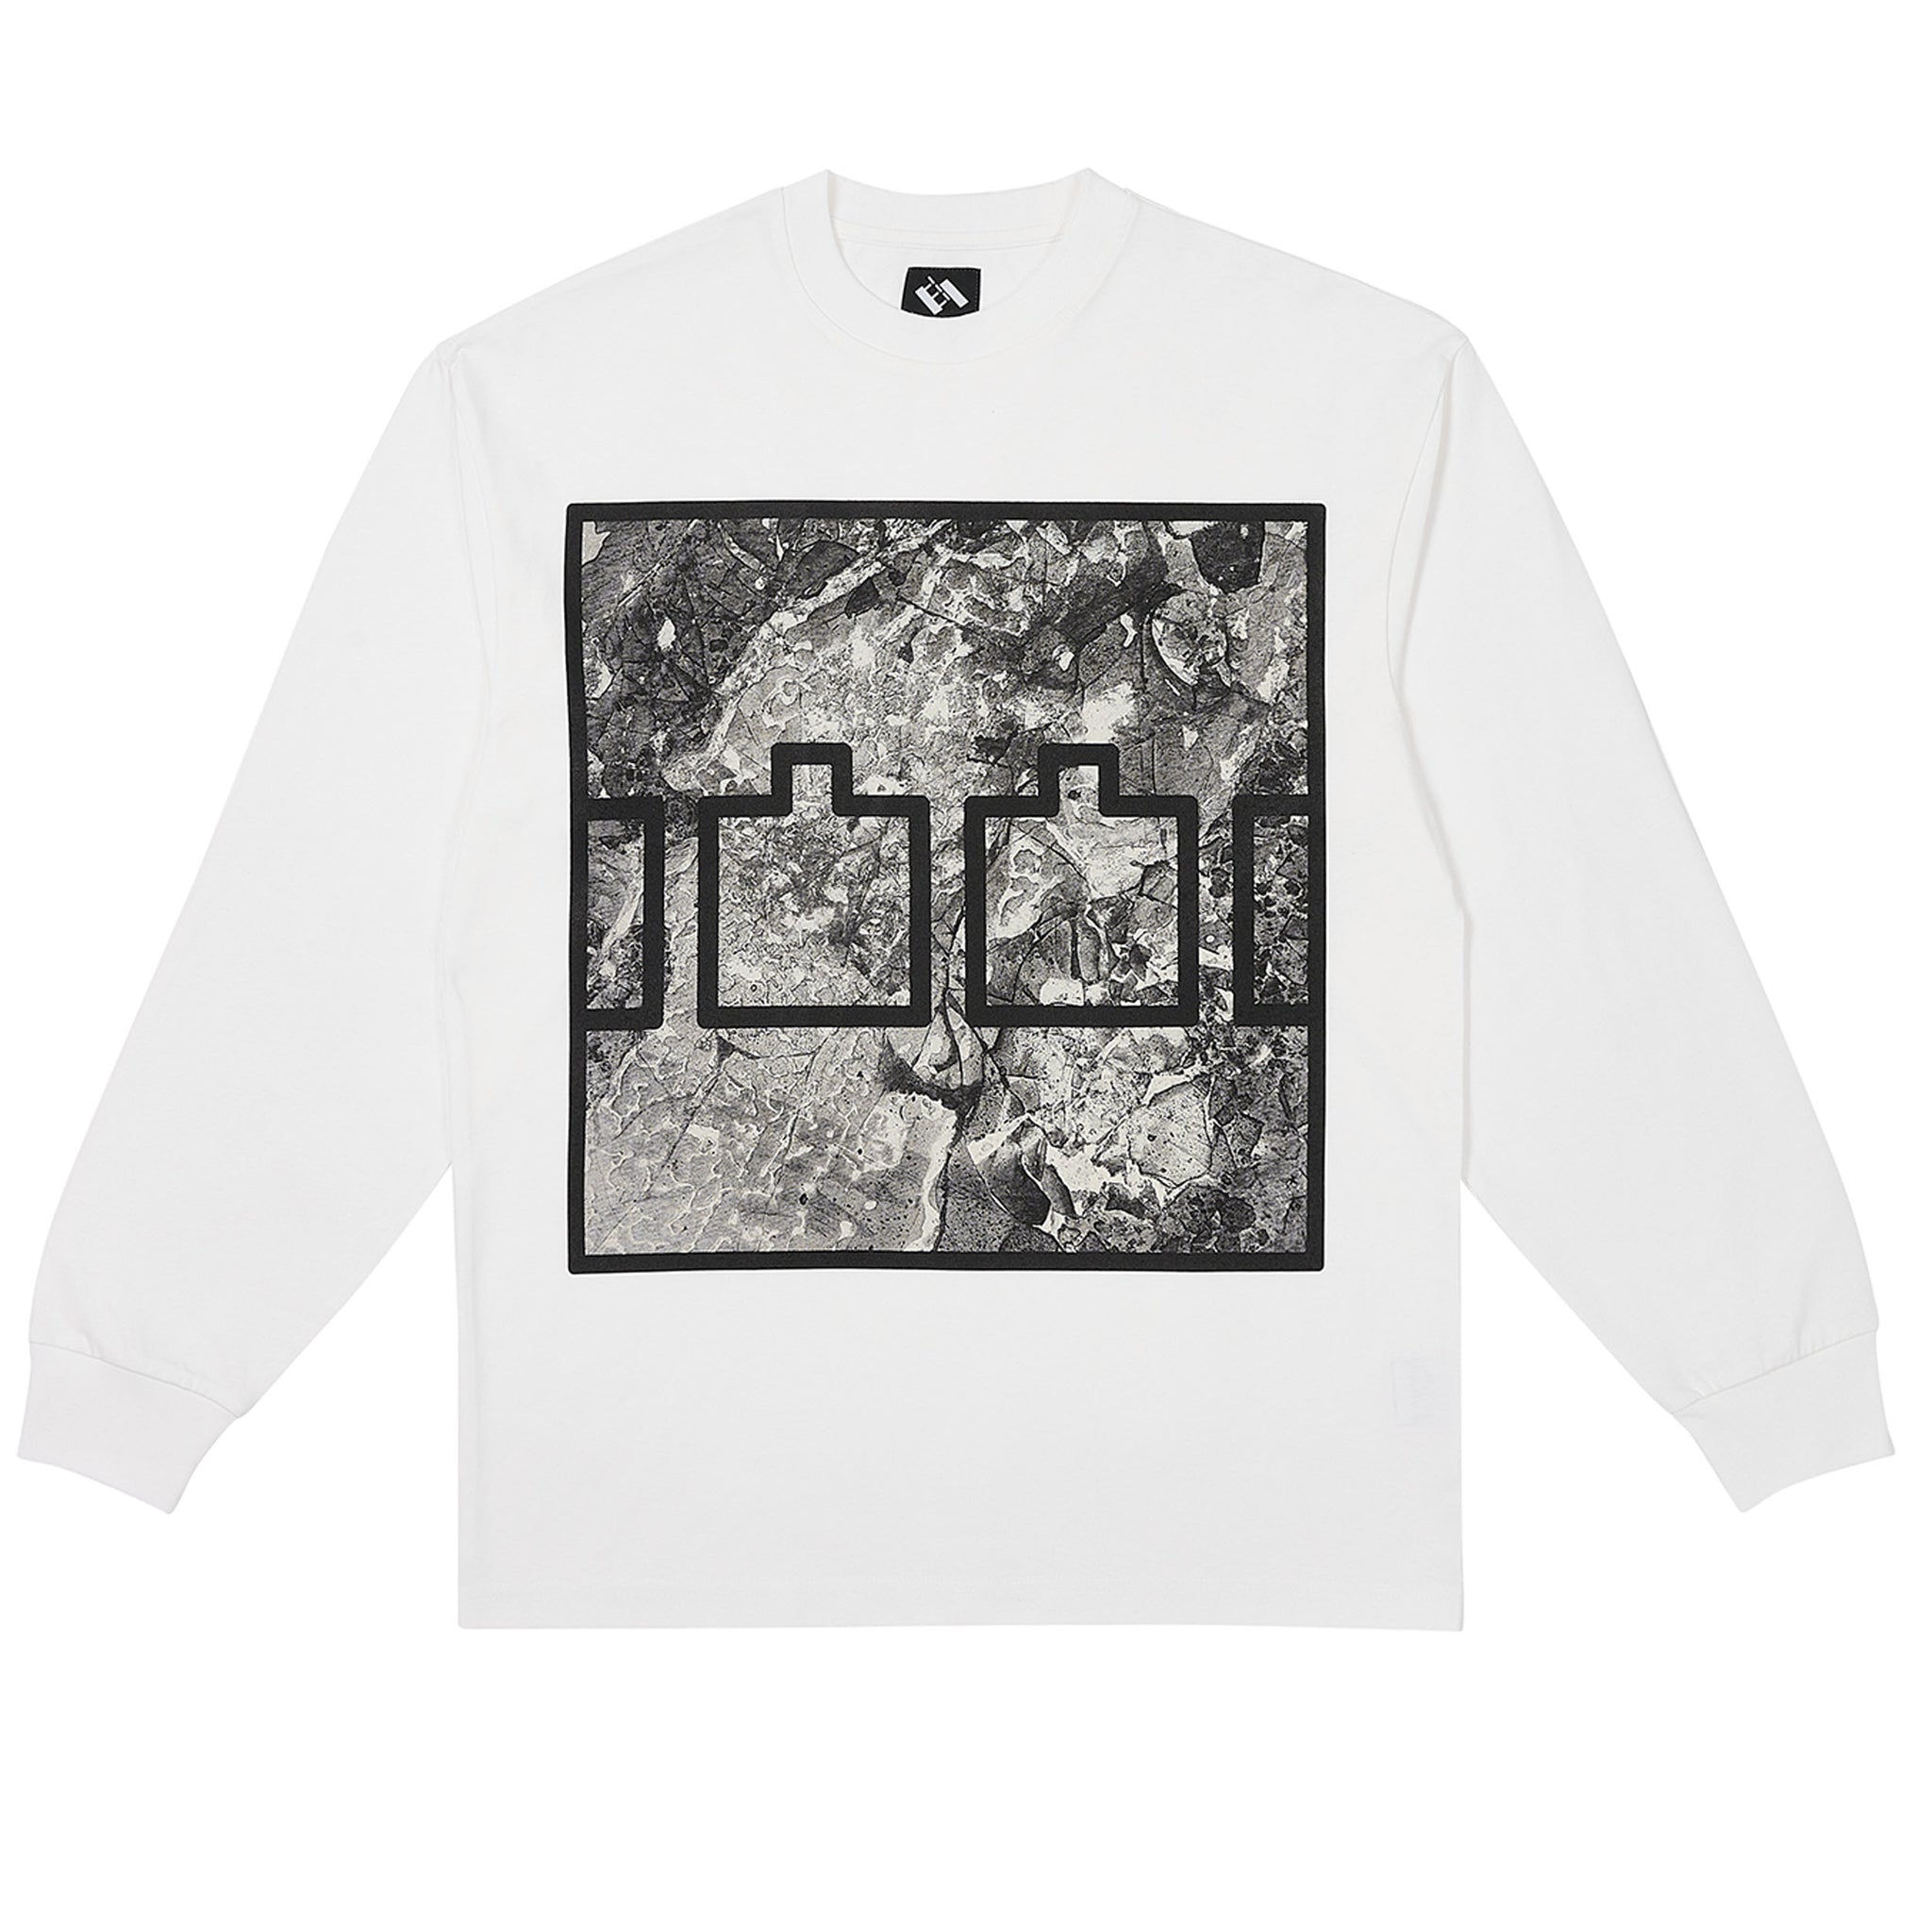 The Trilogy Tapes Block Ice Longsleeve White